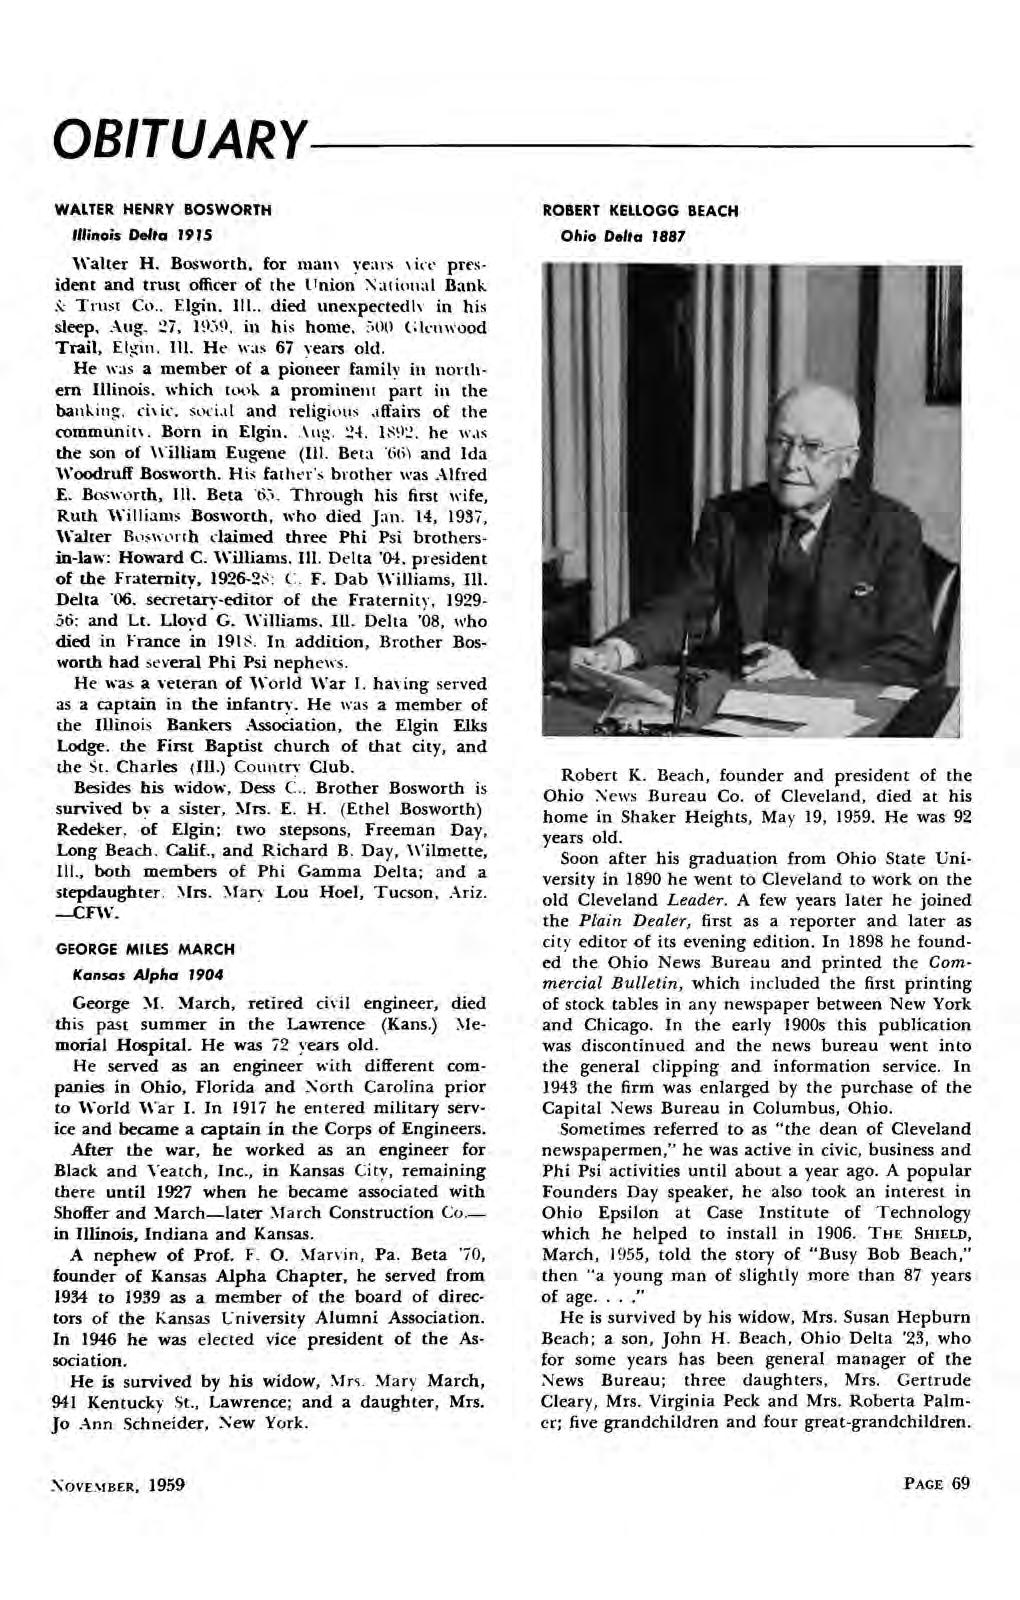 OBITUARY WALTER HENRY BOSWORTH Winois Delta 191S Walter H. Bosworth, for manv years vice president and trust officer of the I'nion National Bank.-v: Trust Co.. Elgin, III.